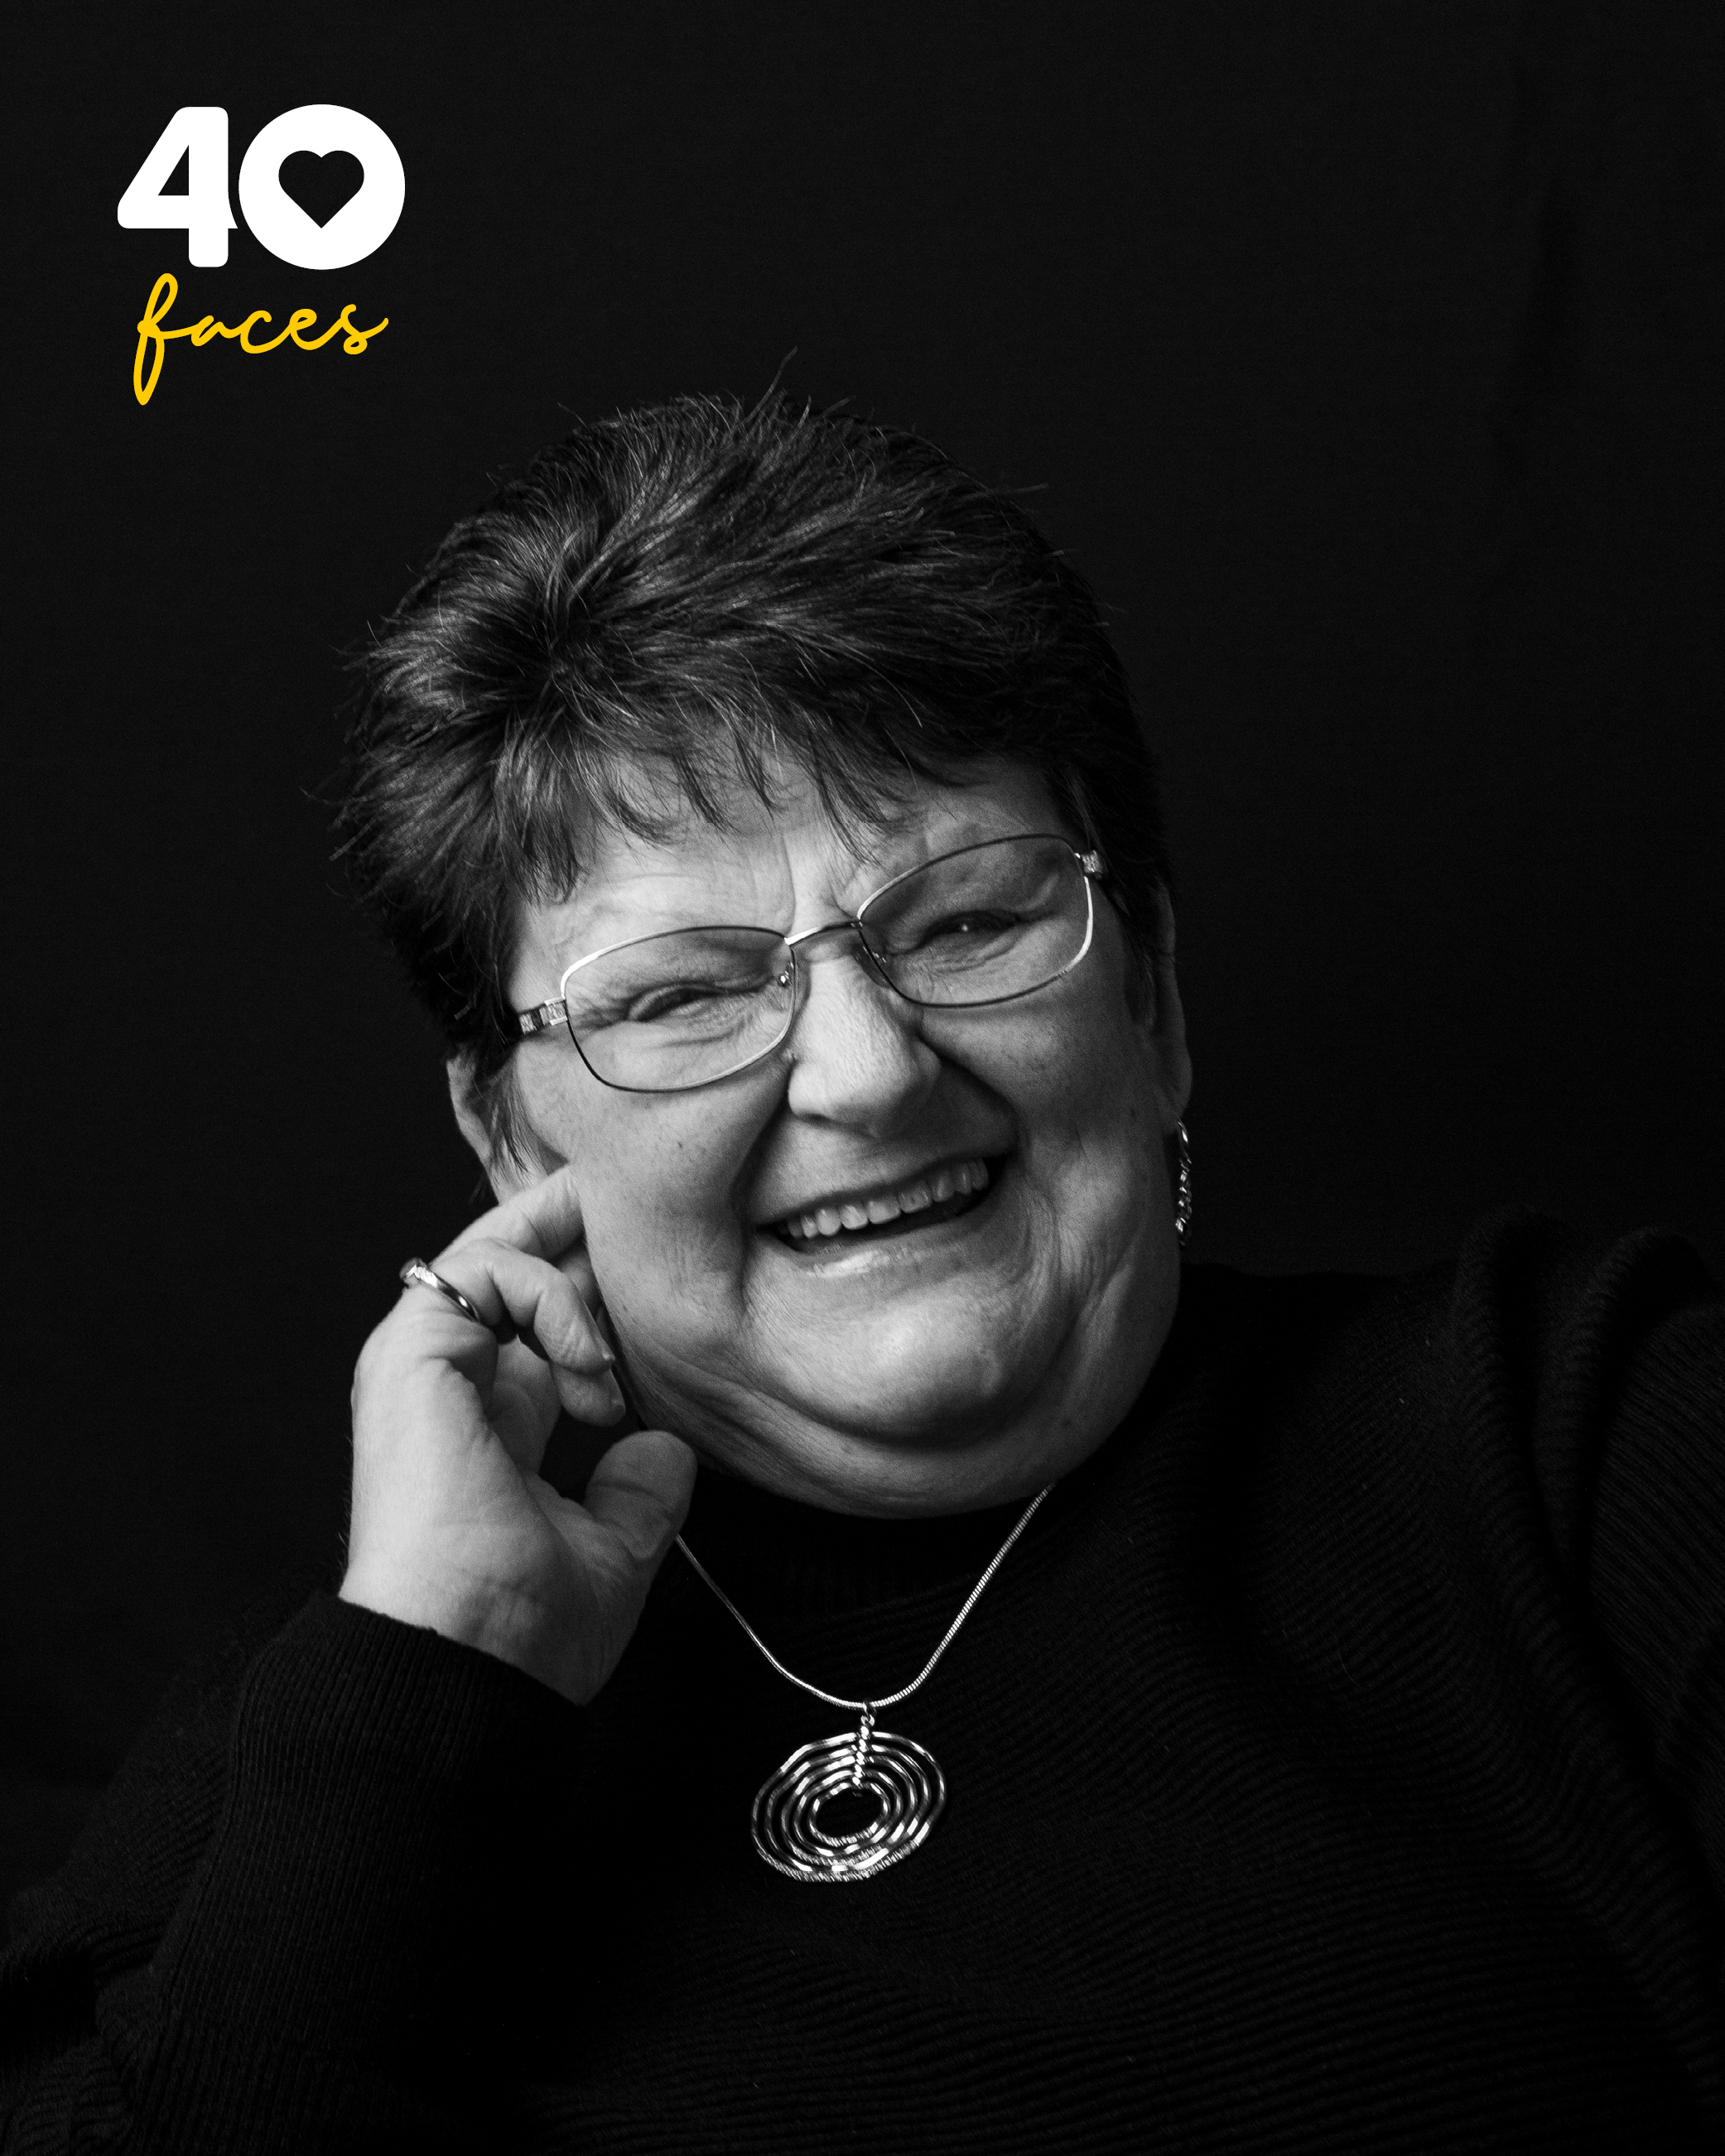 A lady, Yvonne Tye, who is a Ward Clerk at St Barnabas Hospice, photographed in black and white, against a black backdrop